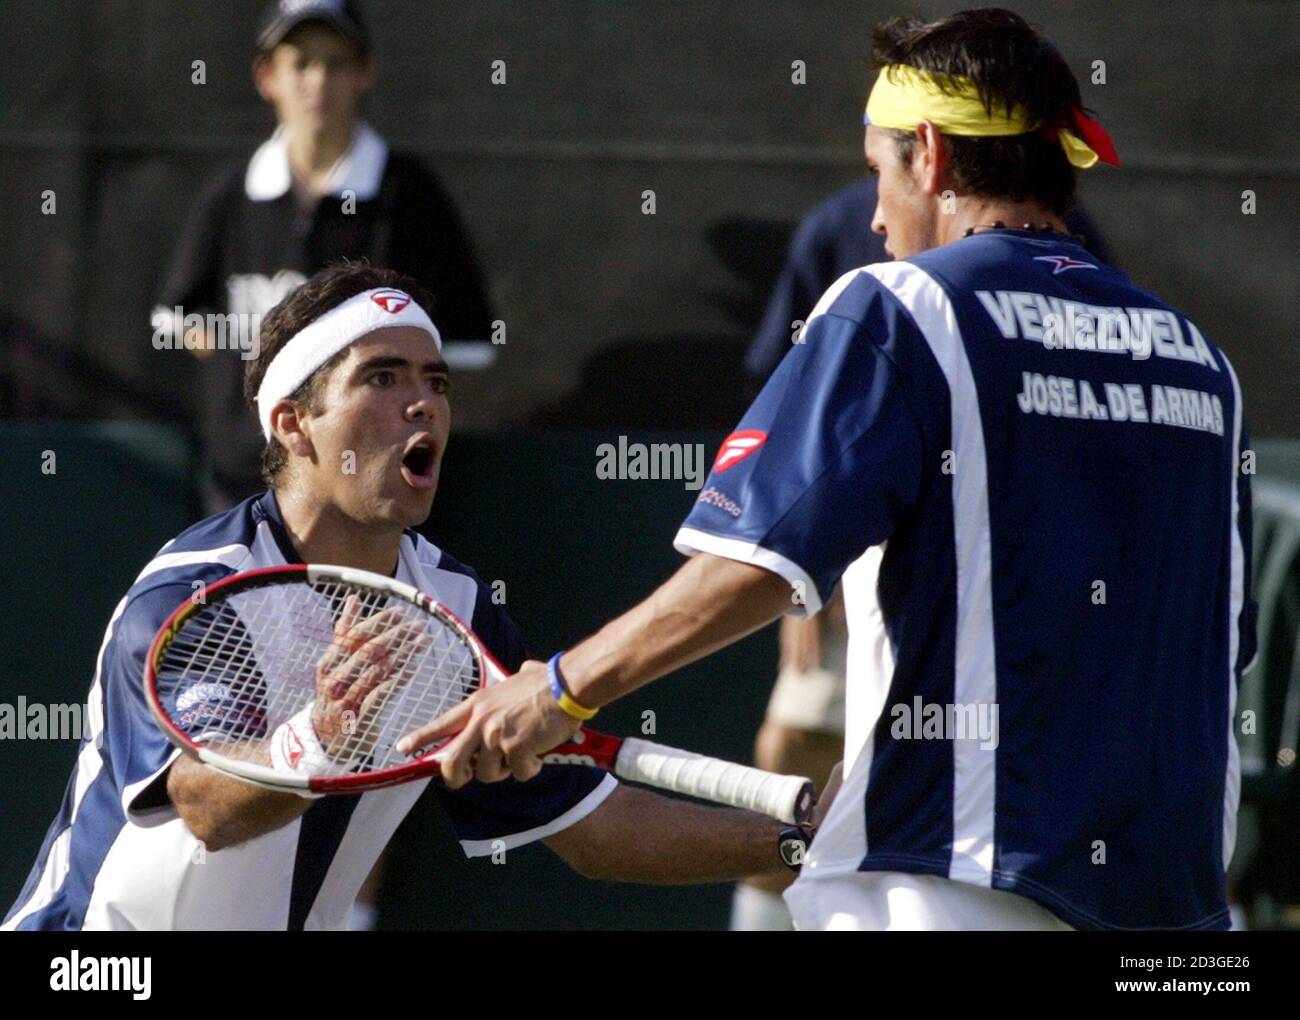 Venezuelan Jhony Romero (L) and Jose Dearmas celebrate after winning a point against Luis Horna and Ivan Miranda of Peru during their Davis Cup doubles match in Caracas, March 5, 2005 REUTERS/Howard Yanes  HY Stock Photo